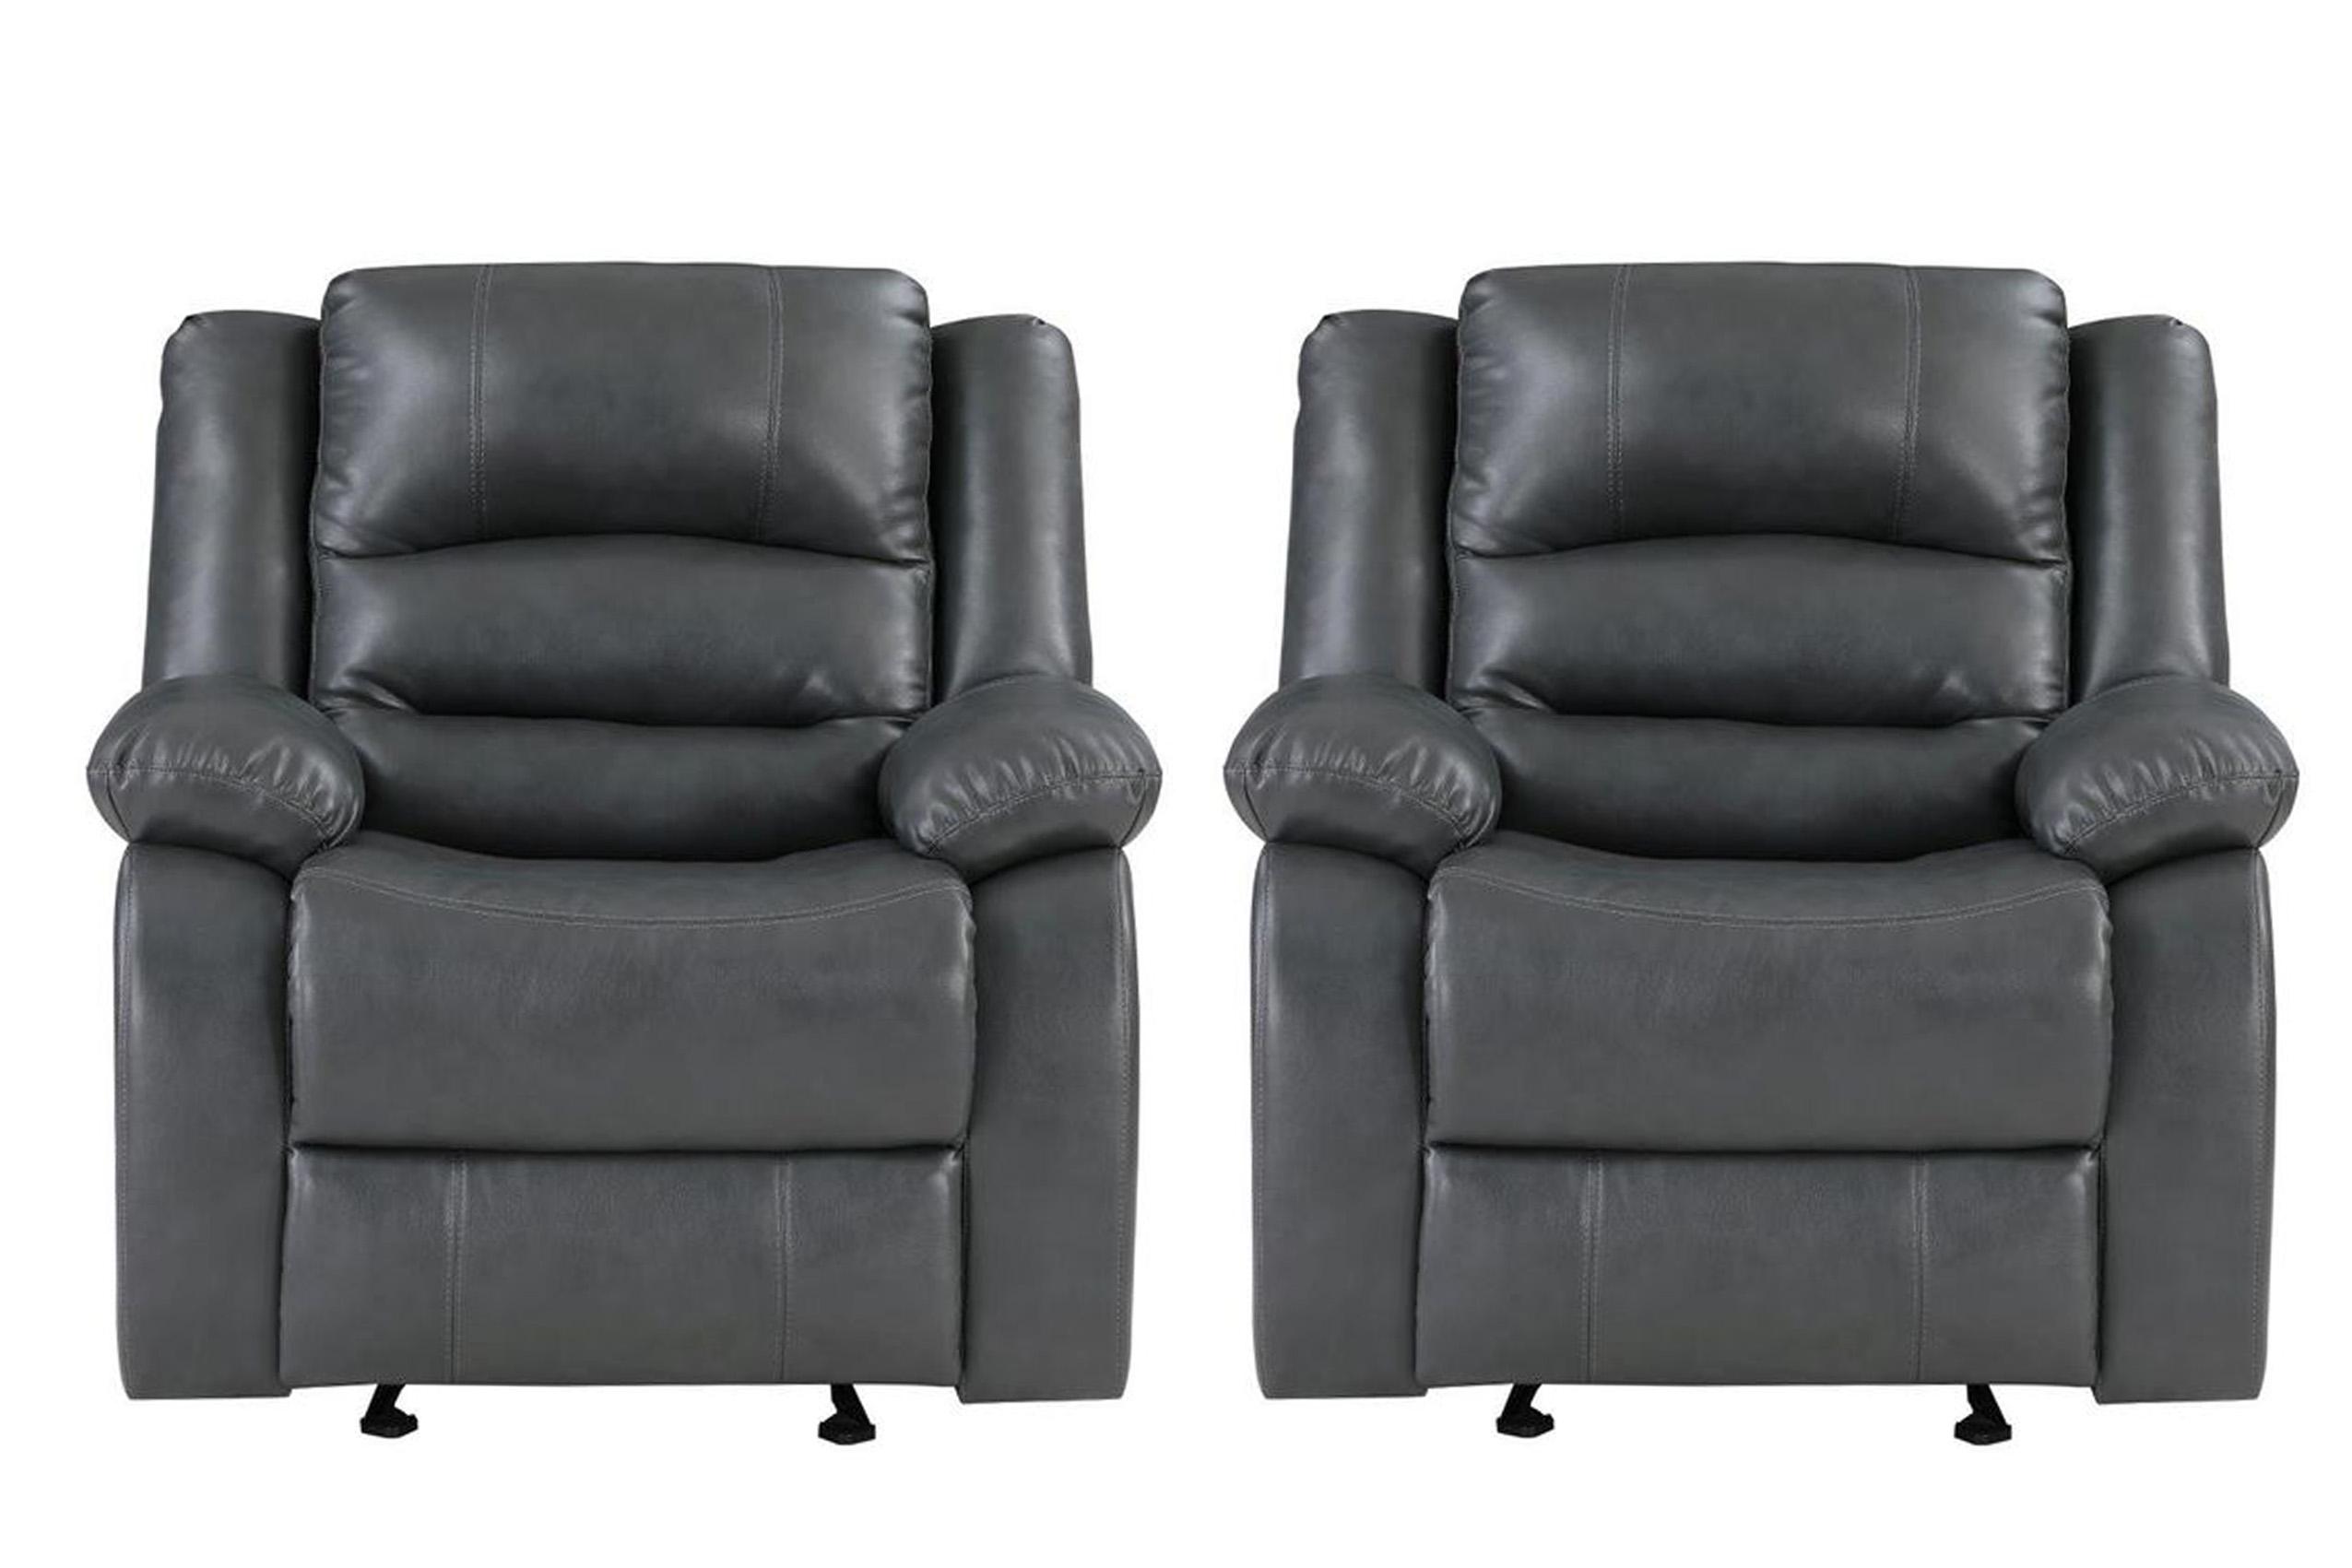 Contemporary, Modern Recliner Chair Set MARTIN GR MARTIN-GR-CH-Set-2 in Gray Faux Leather